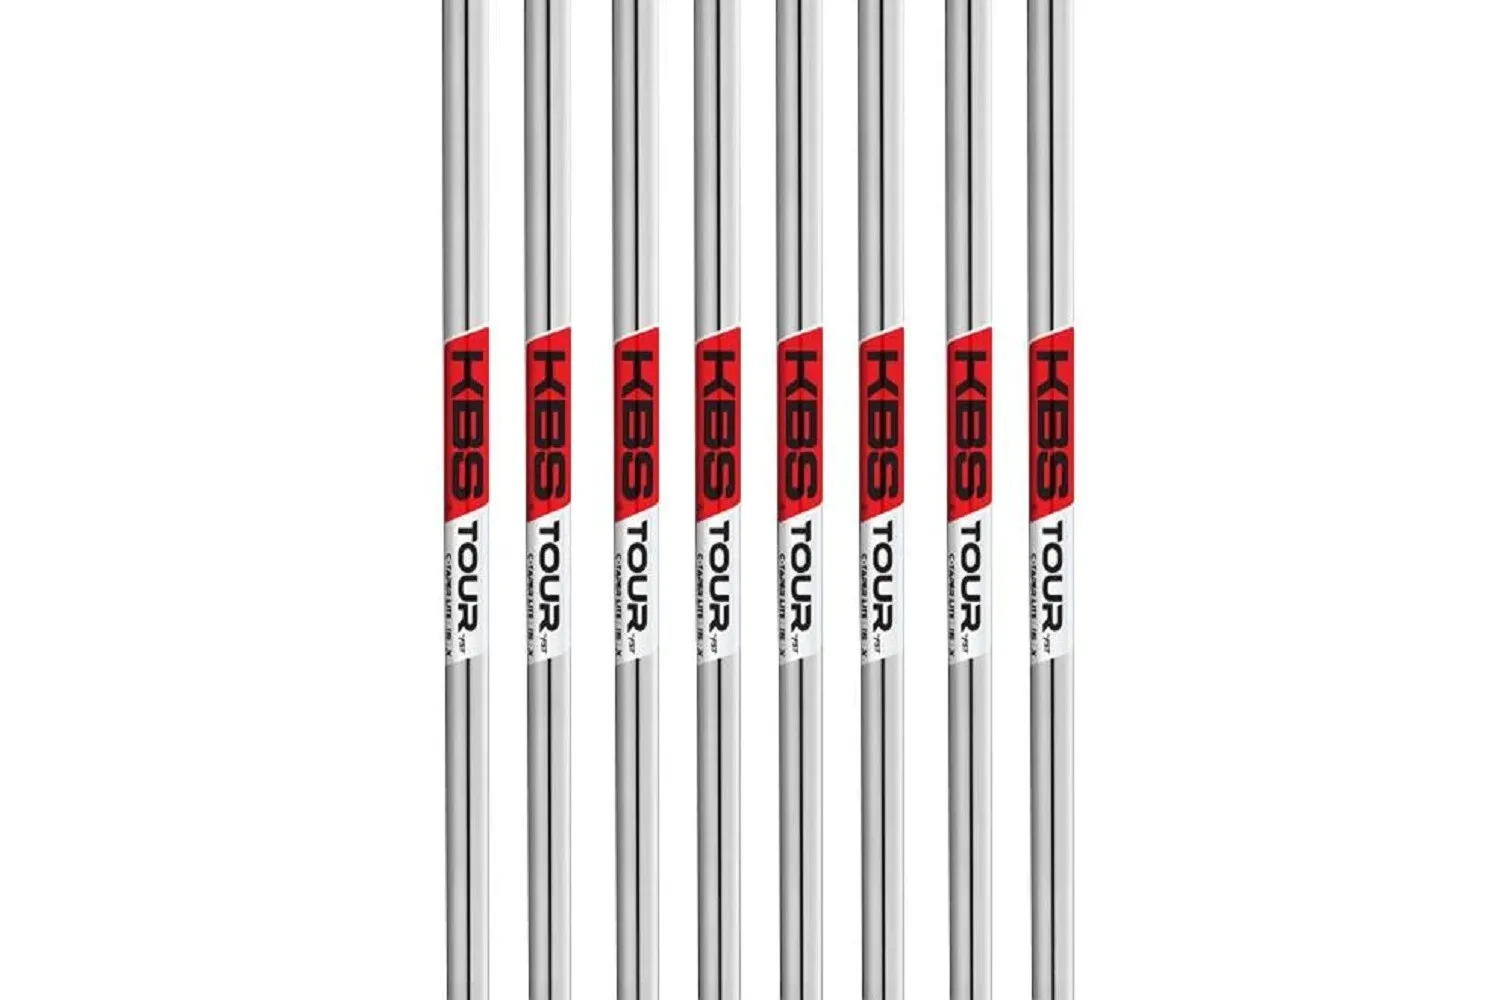 kbs tour c taper shaft review